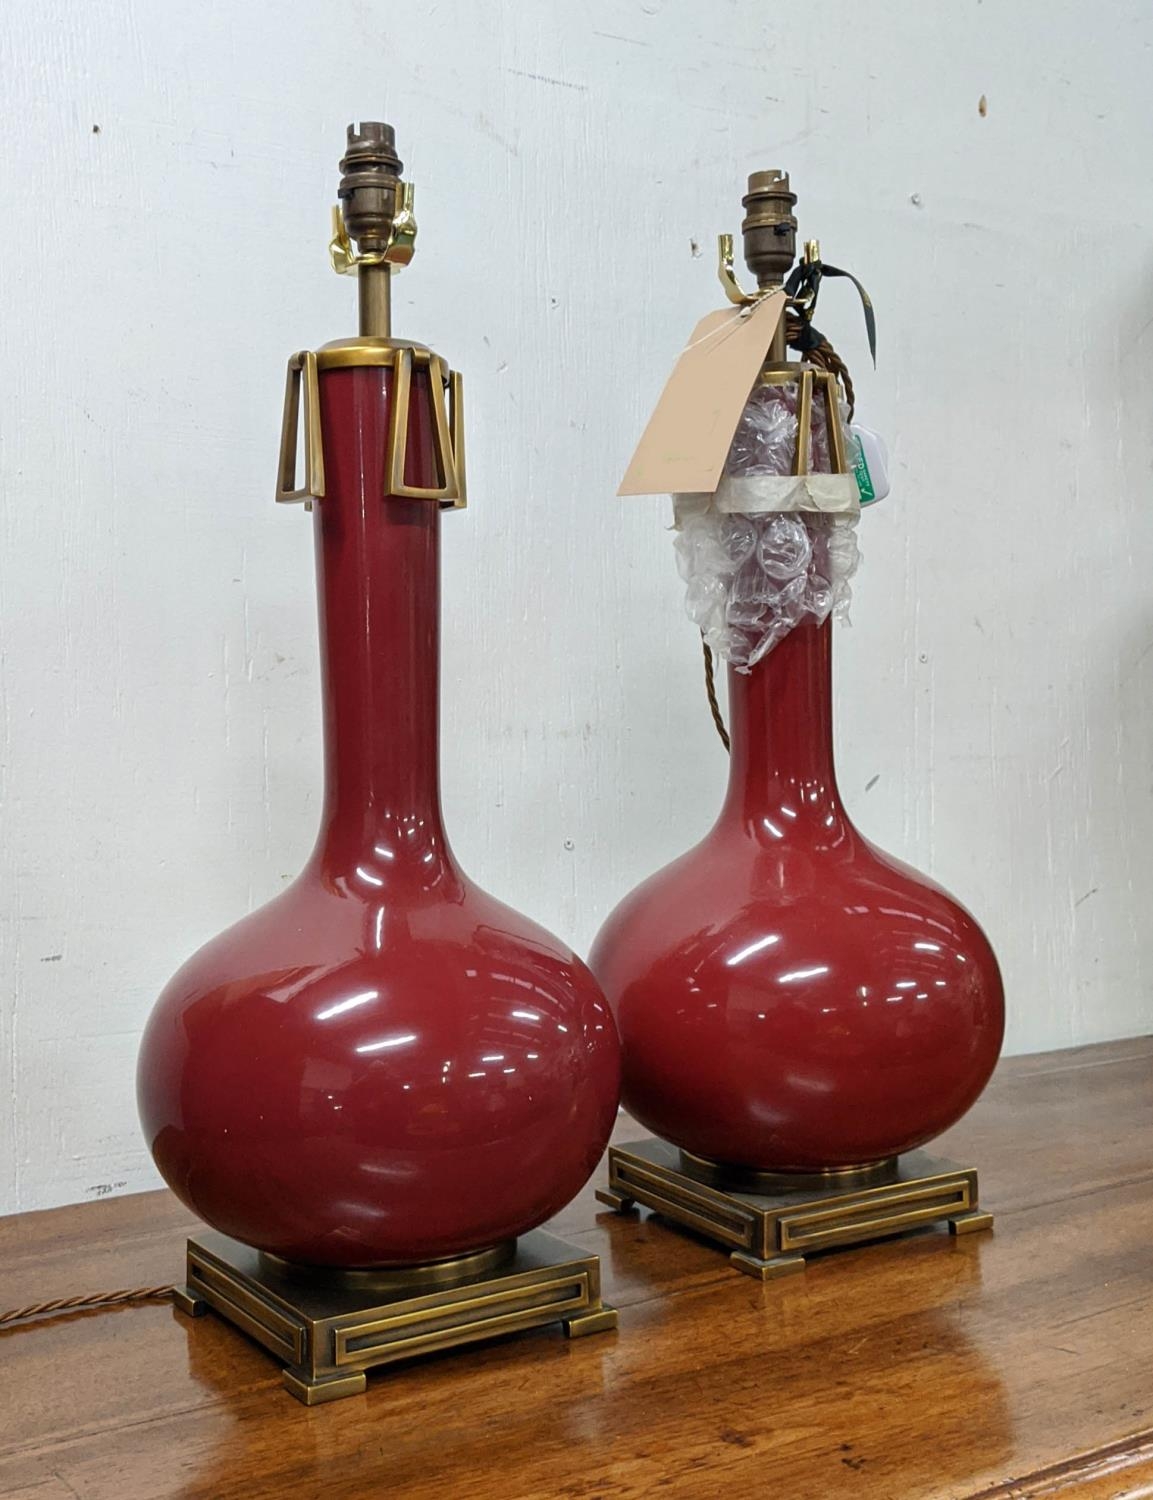 PAOLO MOSCHINO ADESSA TABLE LAMPS, a pair, oxblood finish, 60cm H. (2) - Image 2 of 7